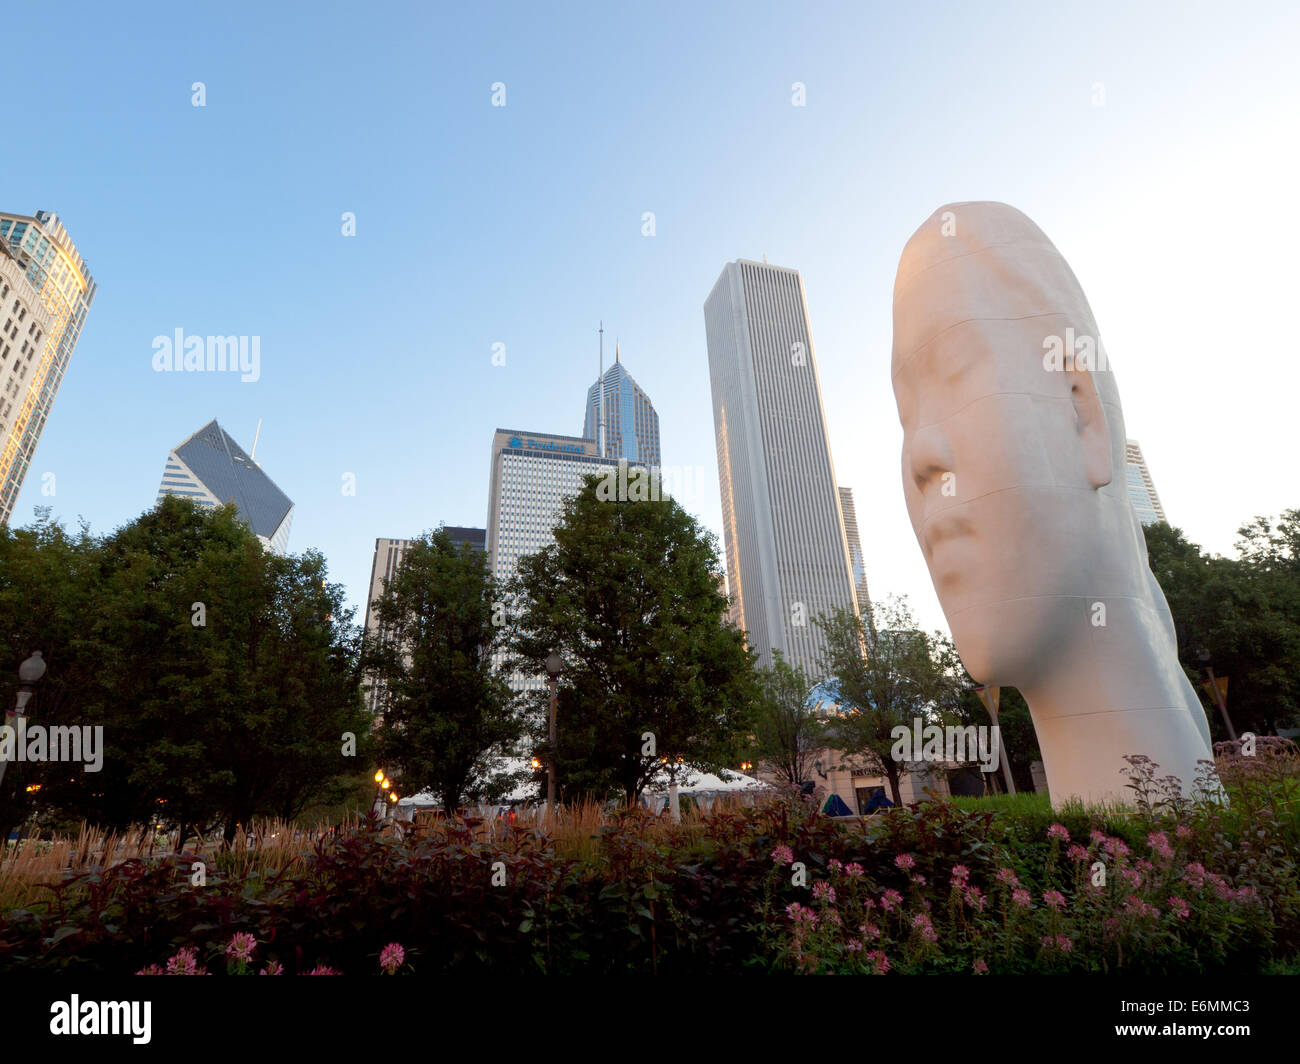 'Looking Into My Dreams, Awilda', a sculpture from the 1004 Portraits installation by Jaume Plensa in Millennium Park, Chicago. Stock Photo